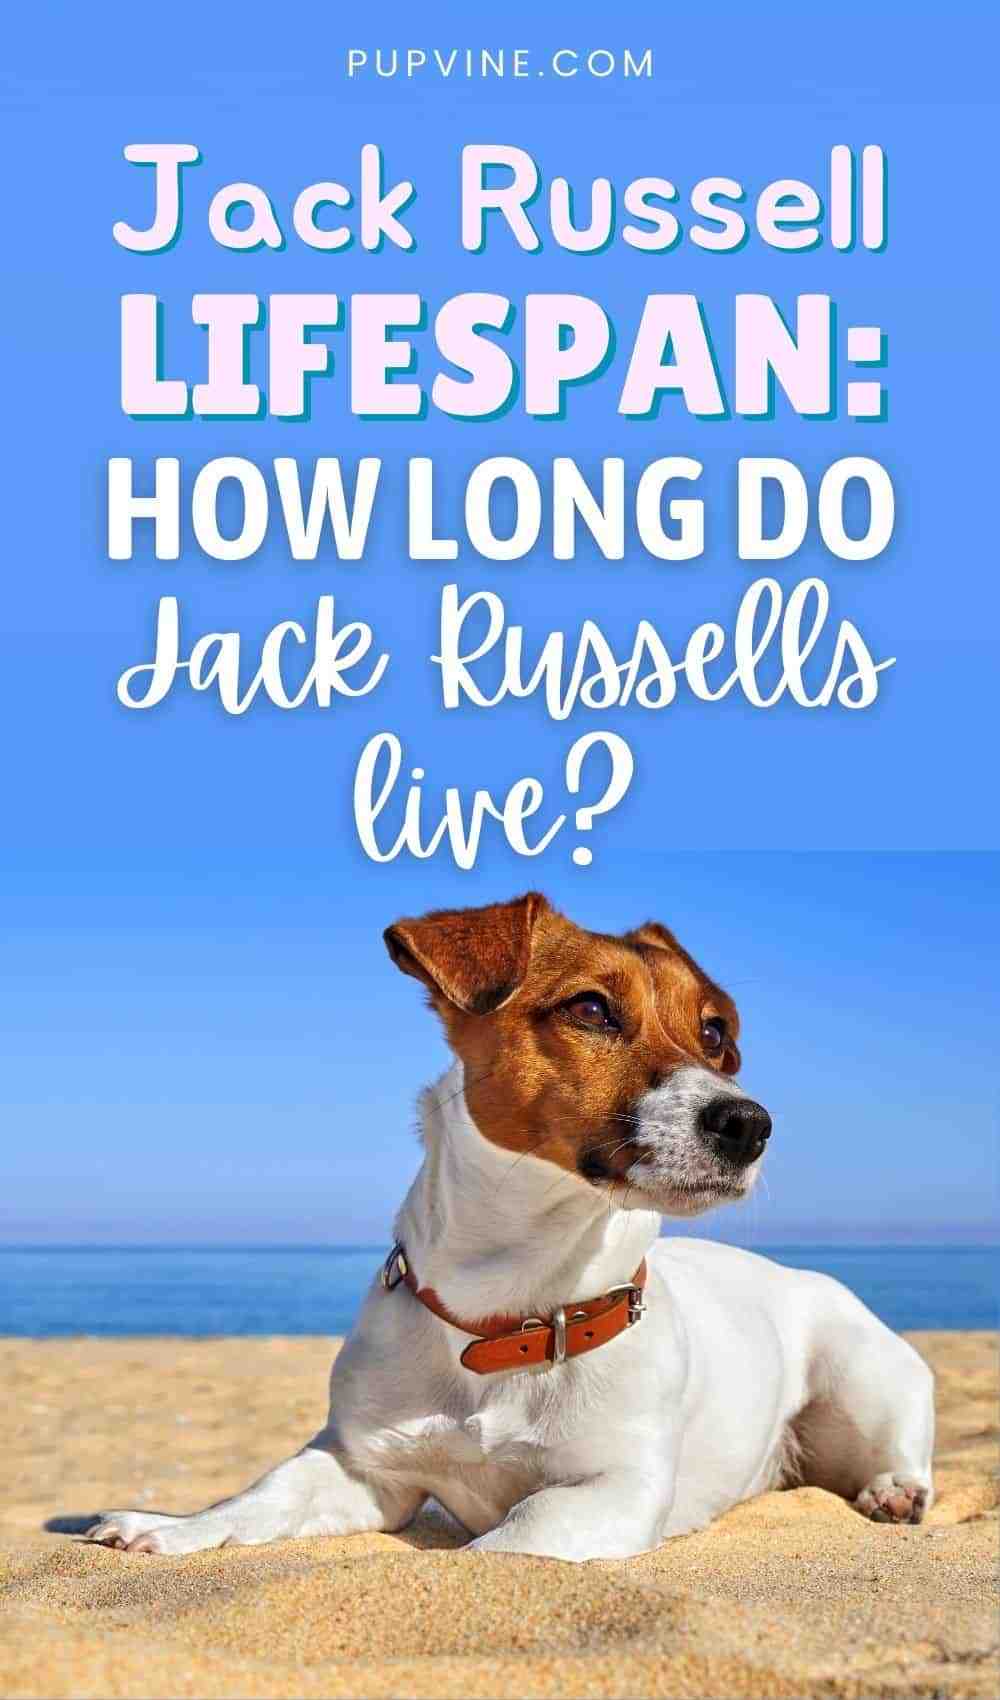 What is the longest living Jack Russell Terrier?